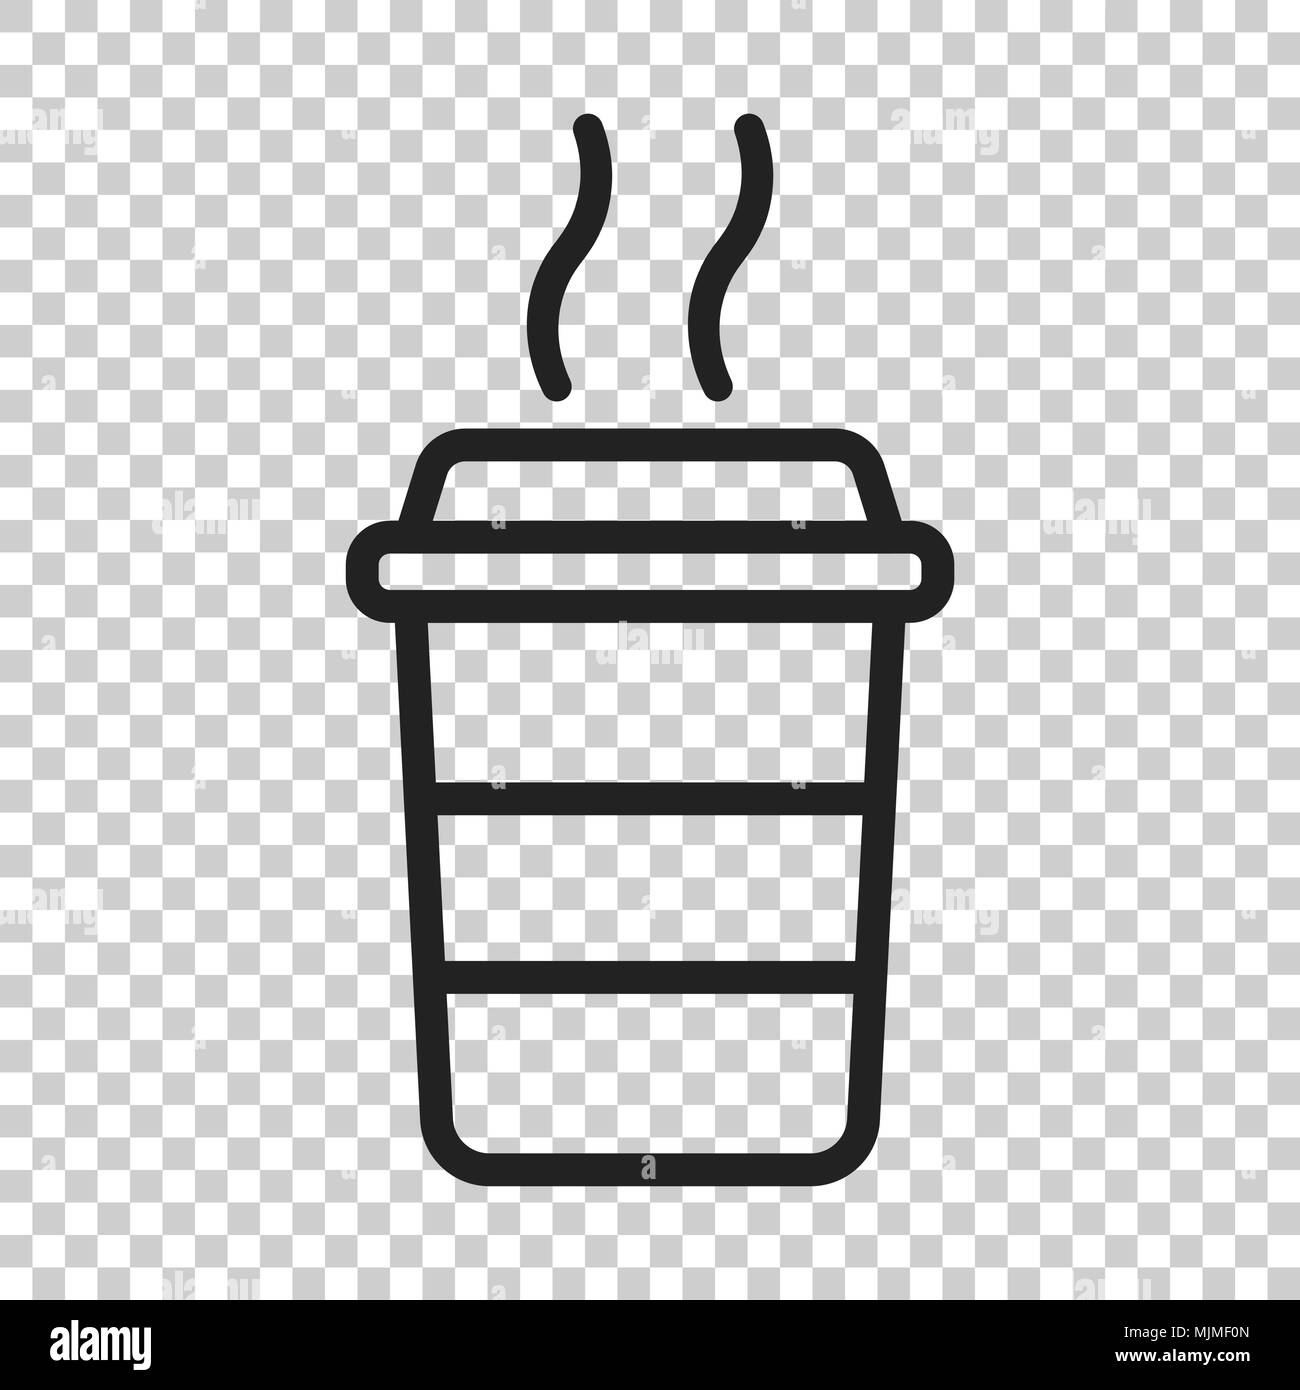 Coffee cup icon. Vector illustration on isolated ...